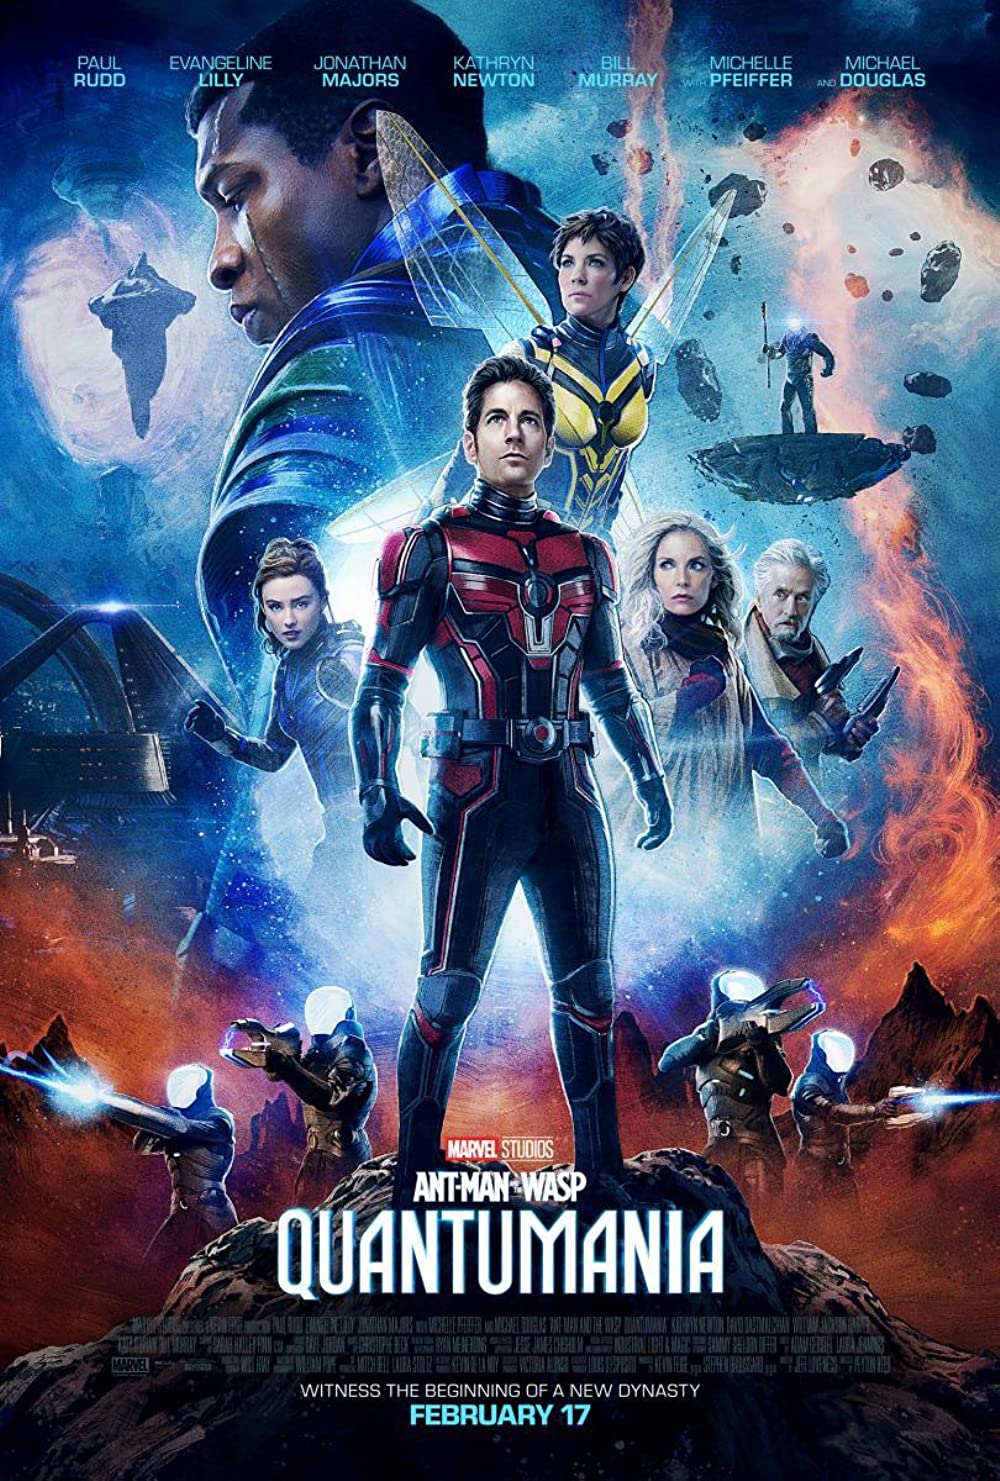 How Quantumania's Rotten Tomatoes Score Compares to Other MCU Movies